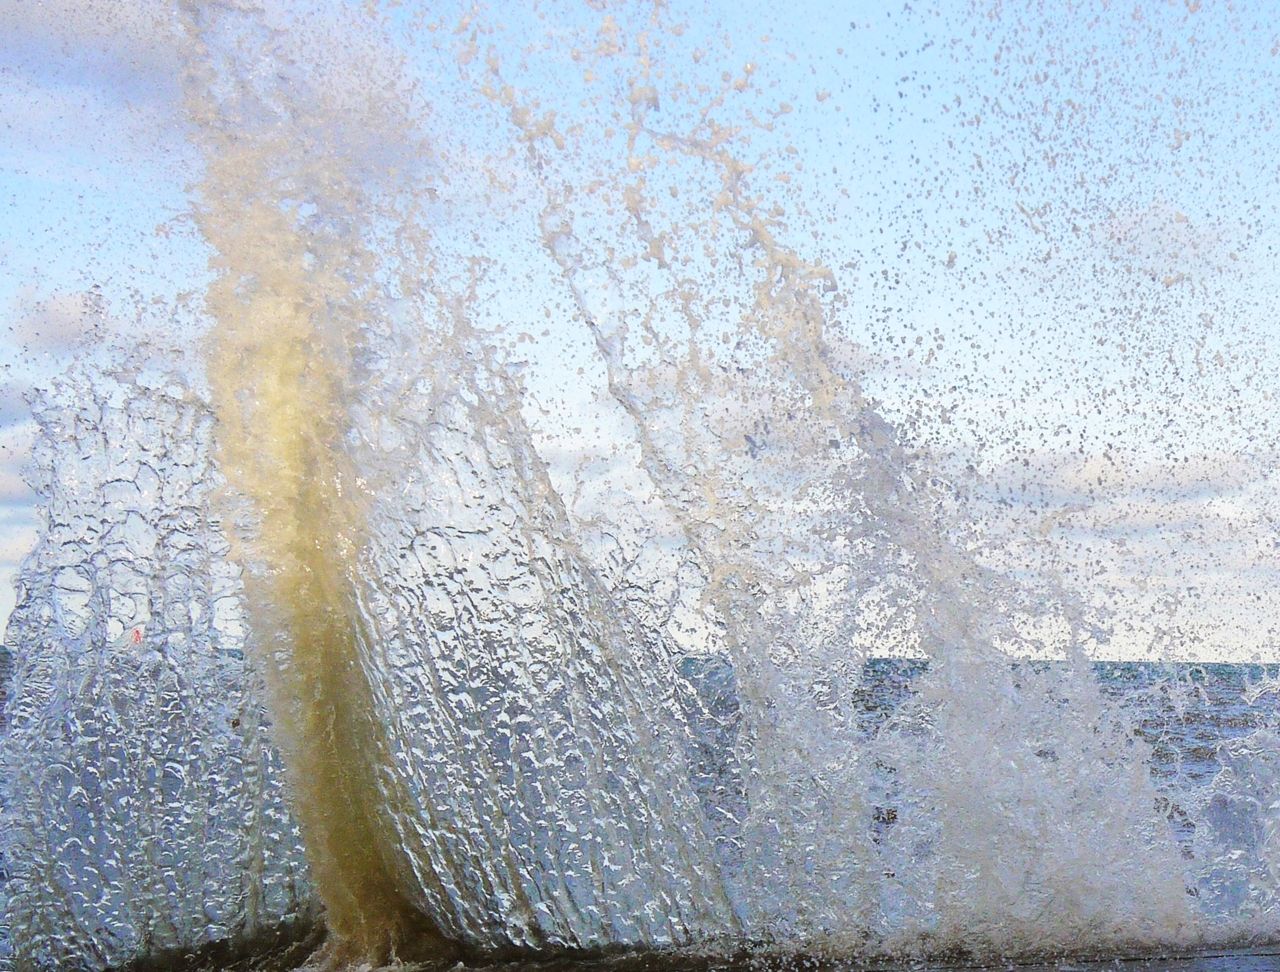 22712343428 - waves crash over the sea wall at high tide in.jpg